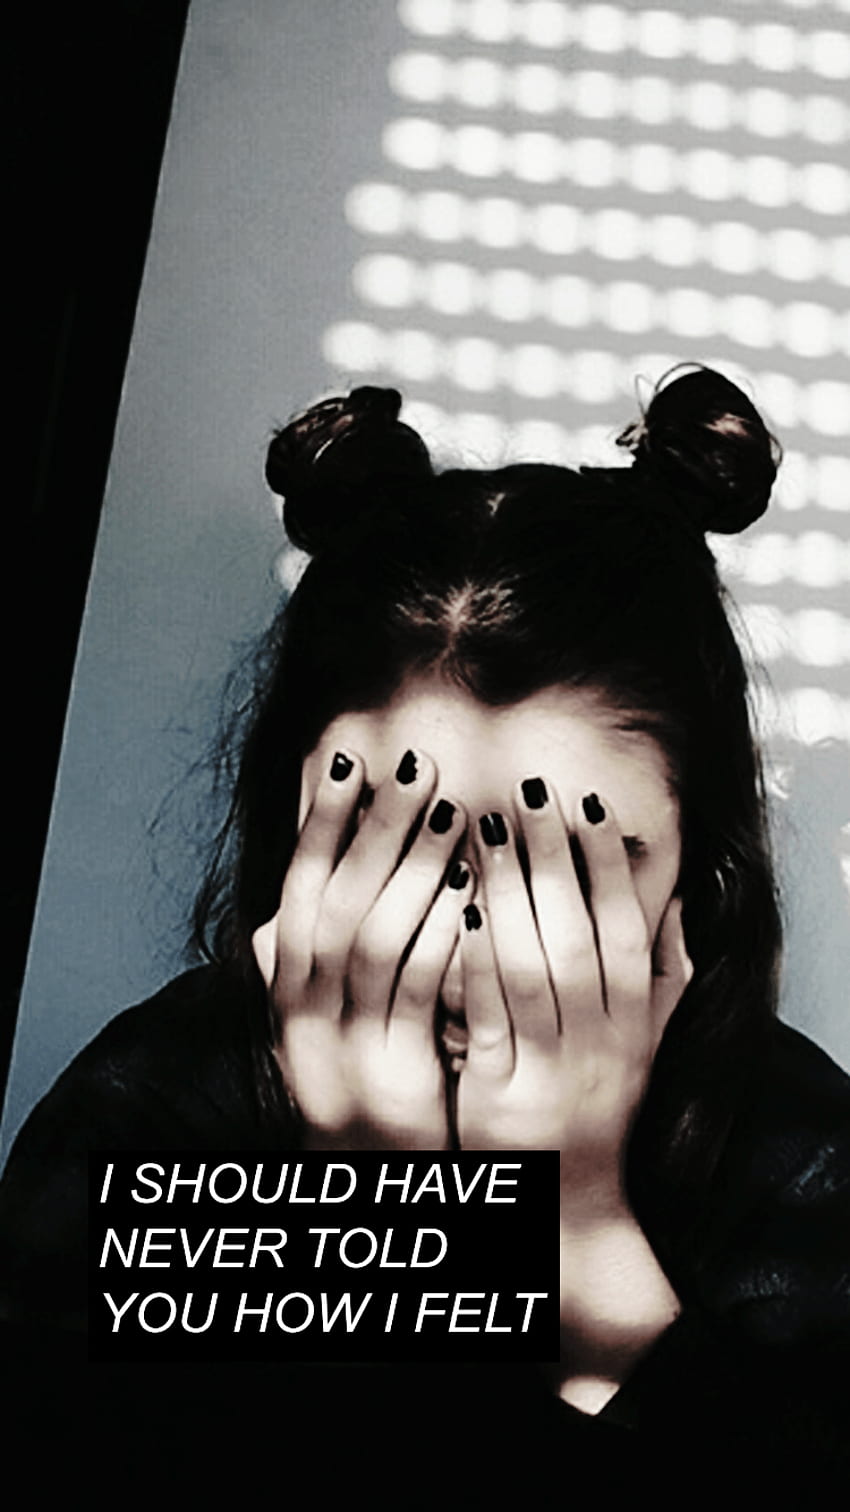 Aesthetic phone wallpaper of a girl with black nails covering her face with her hands - Grunge